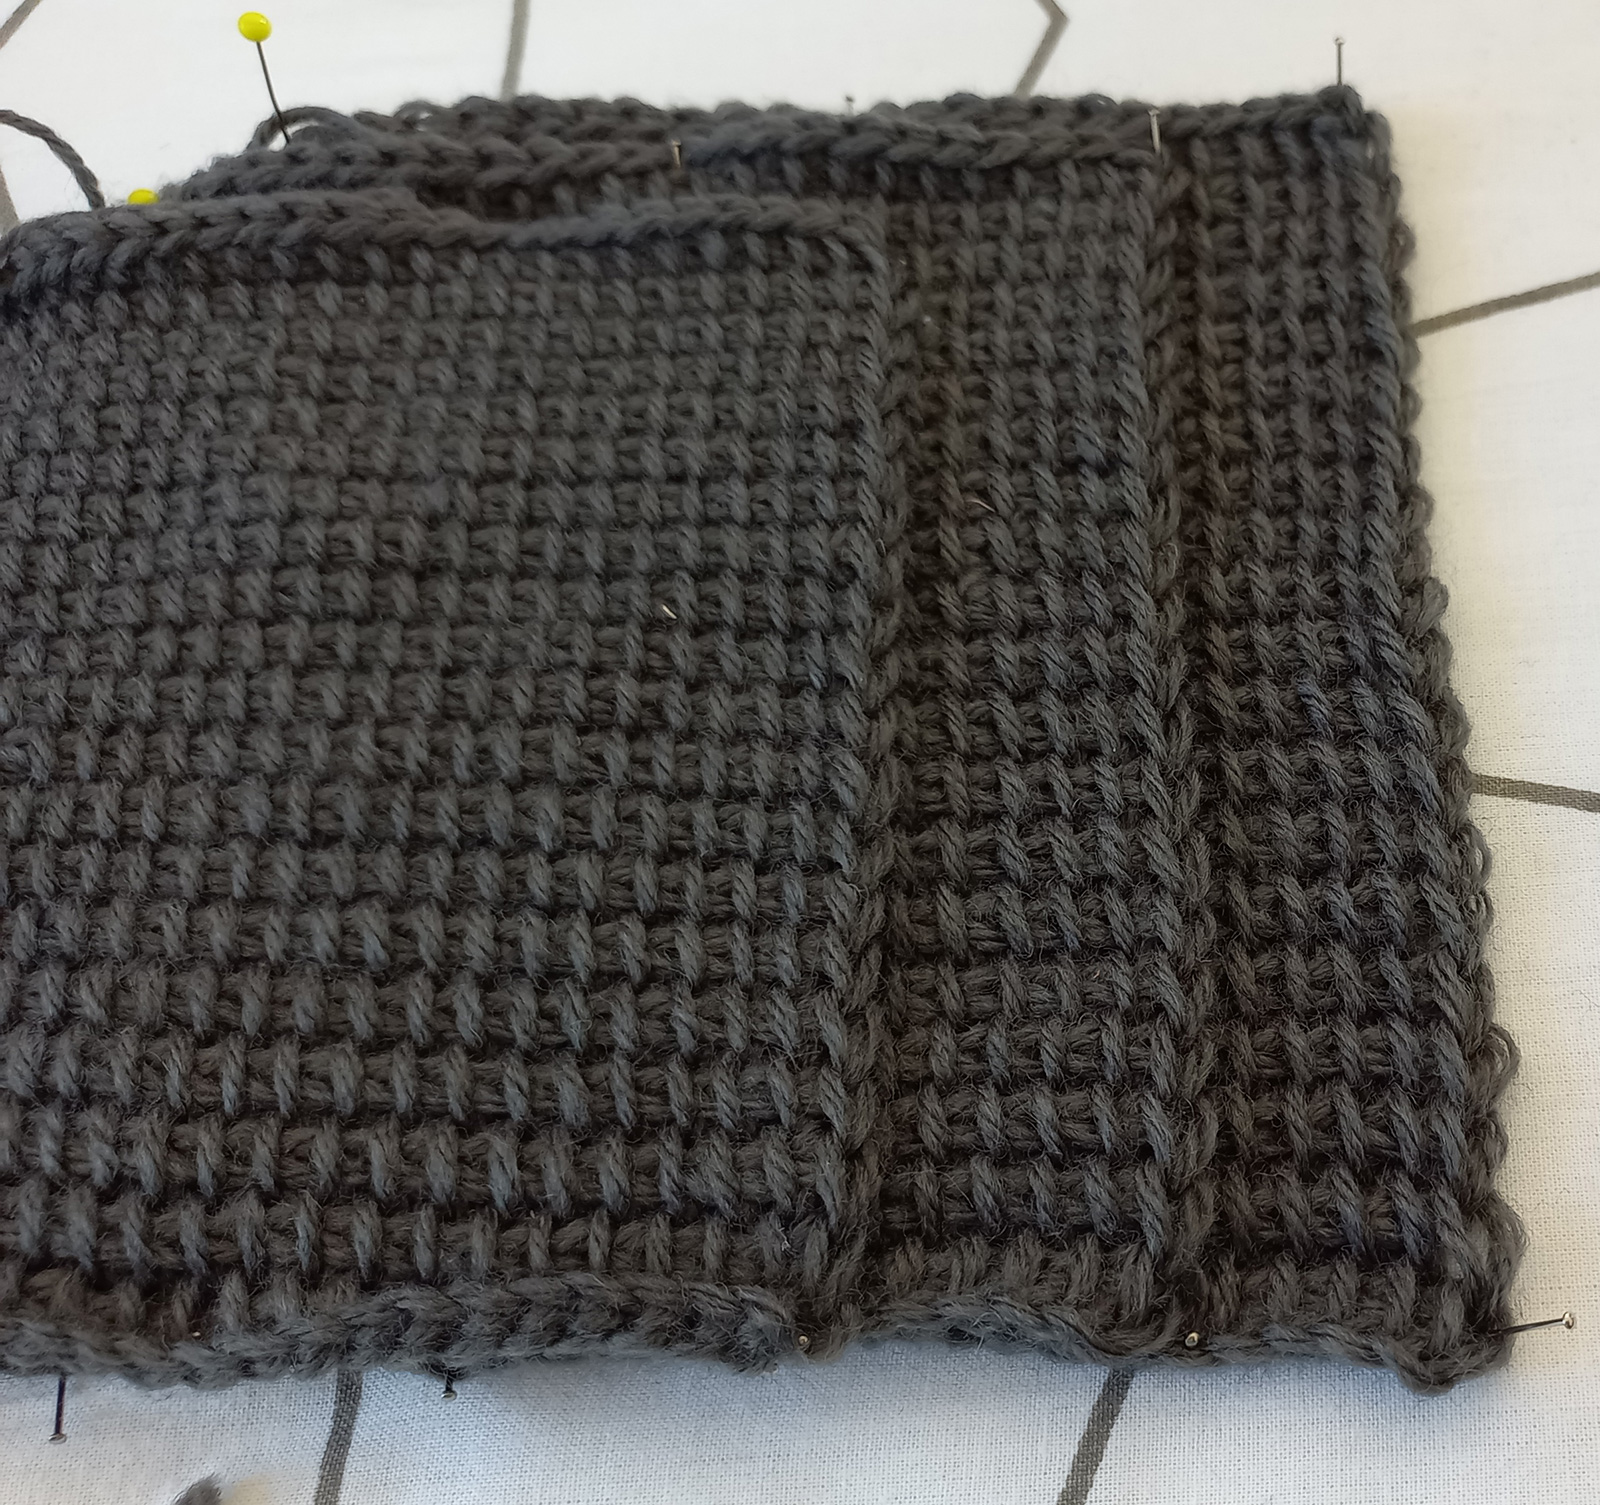 Tunisian crochet: curling and hook size